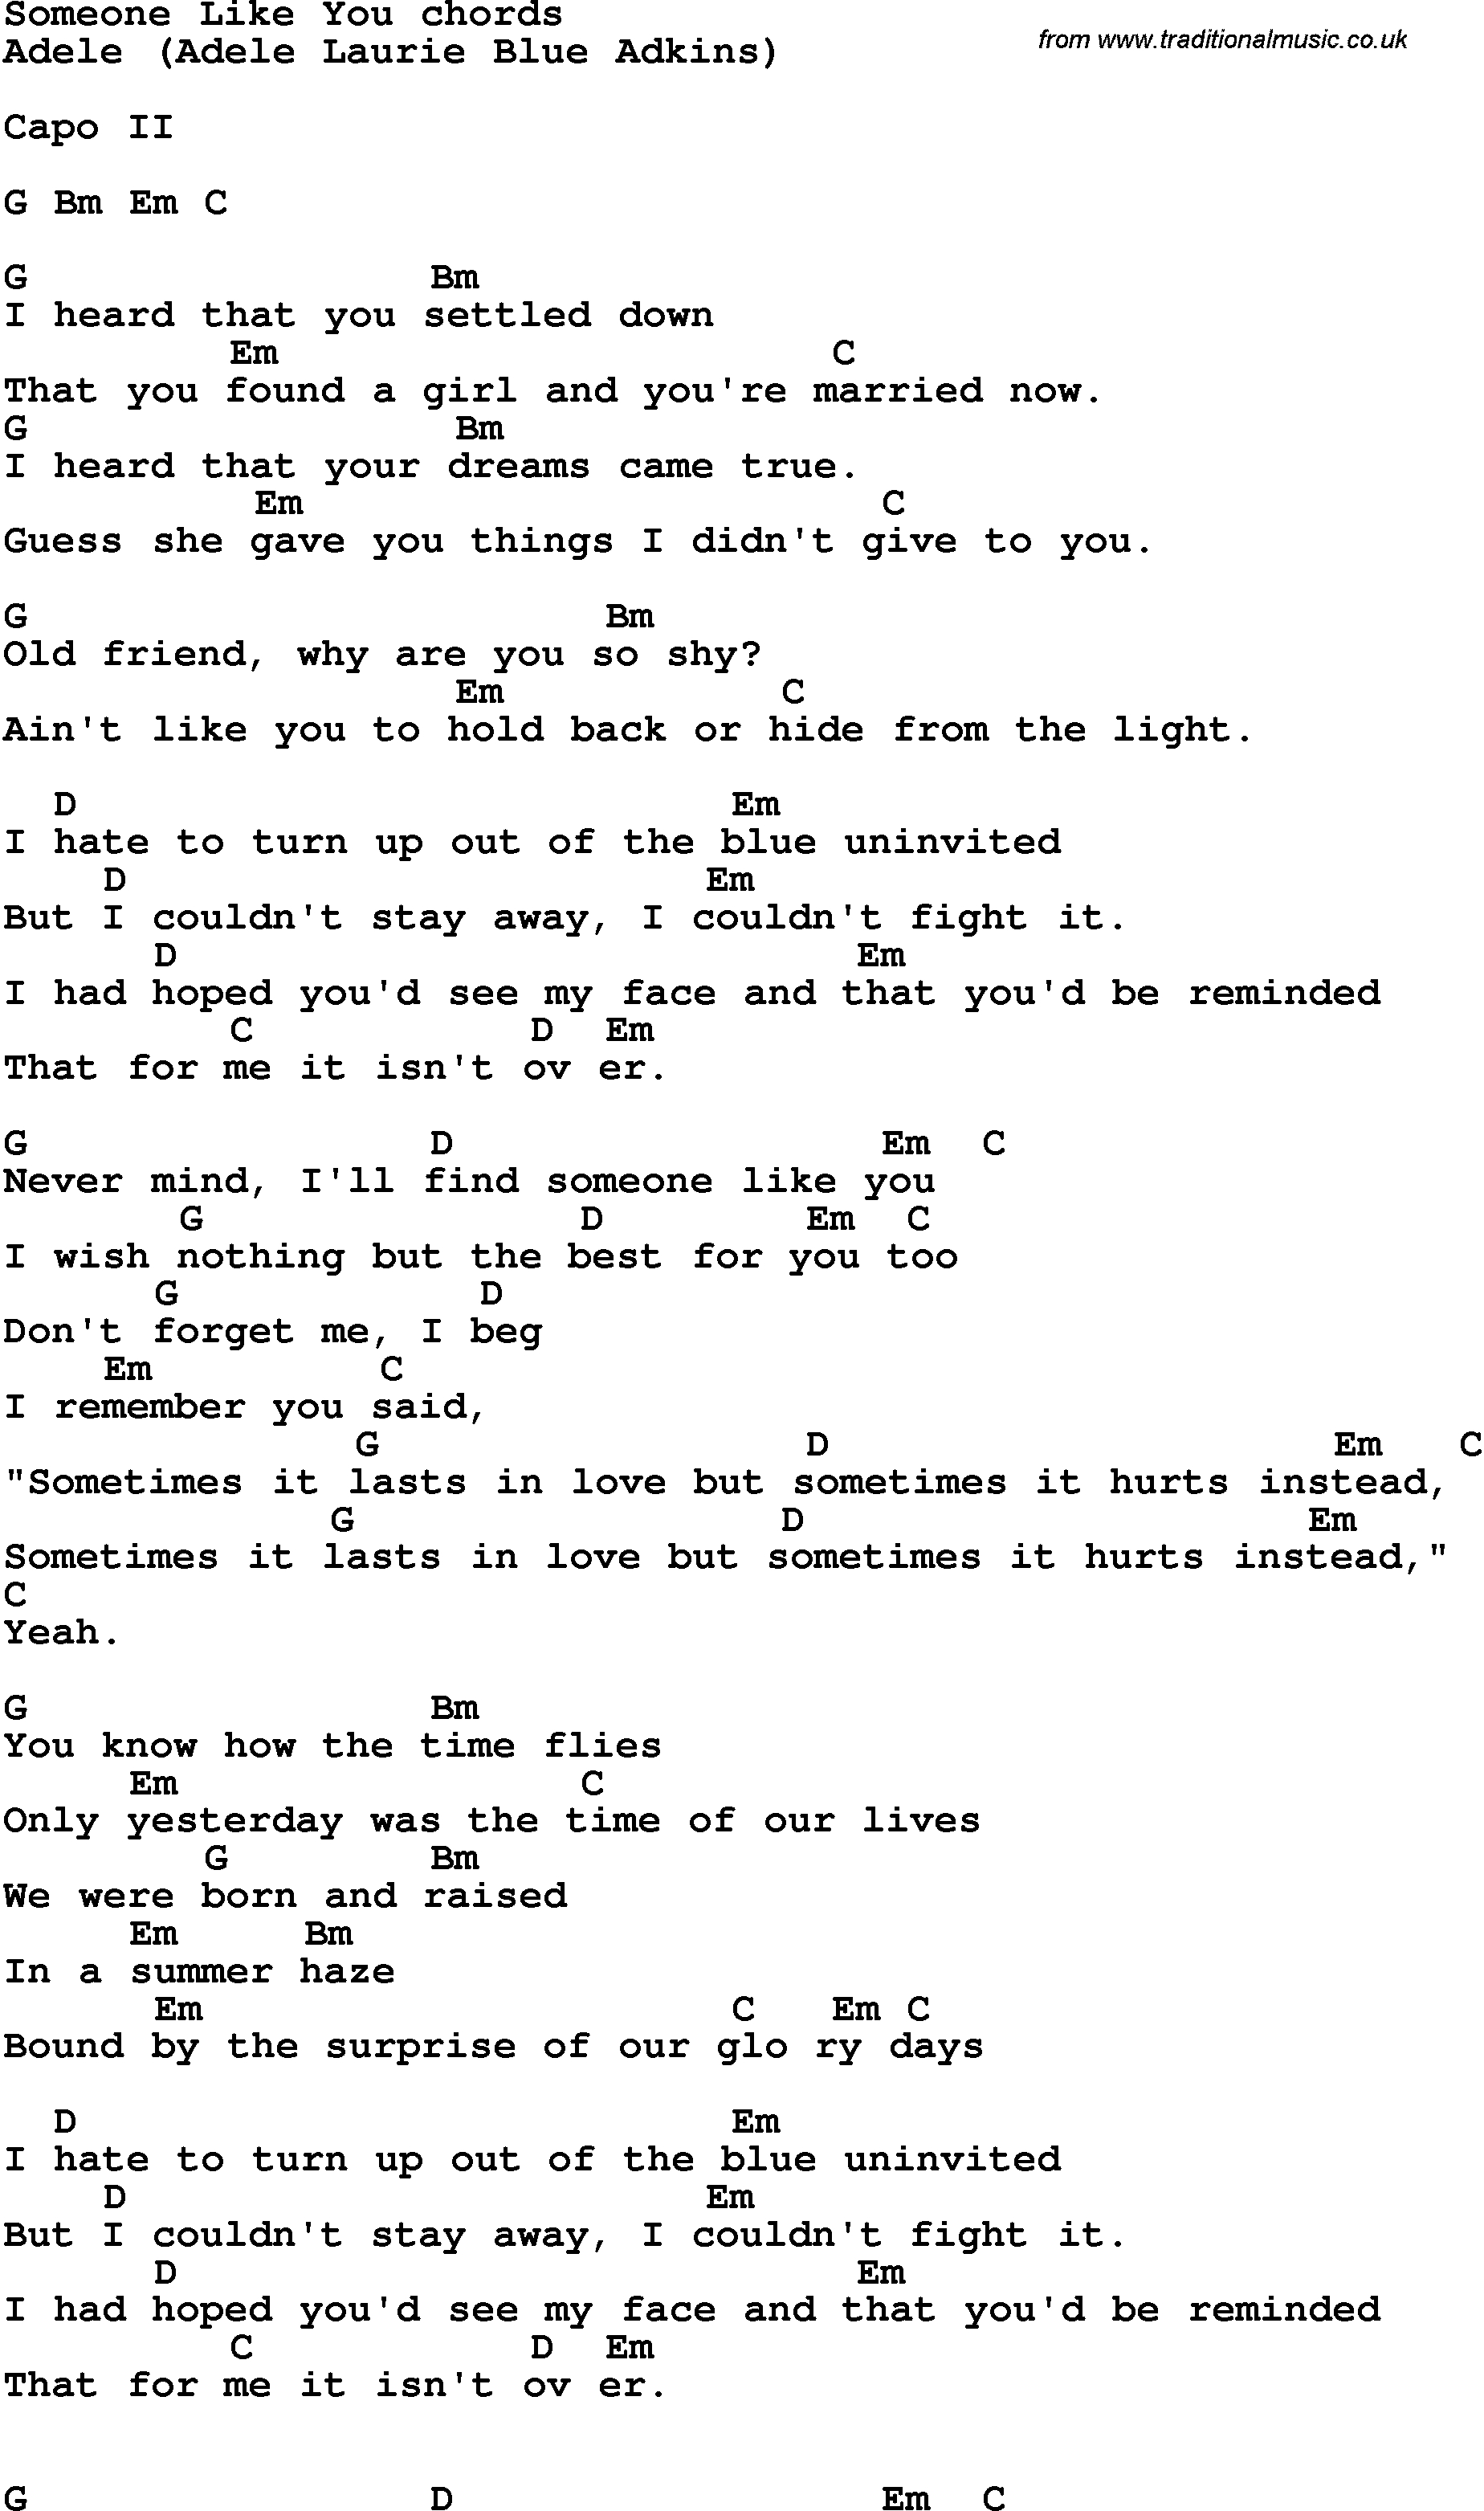 Someone Like You Chords Song Lyrics With Guitar Chords For Someone Like You